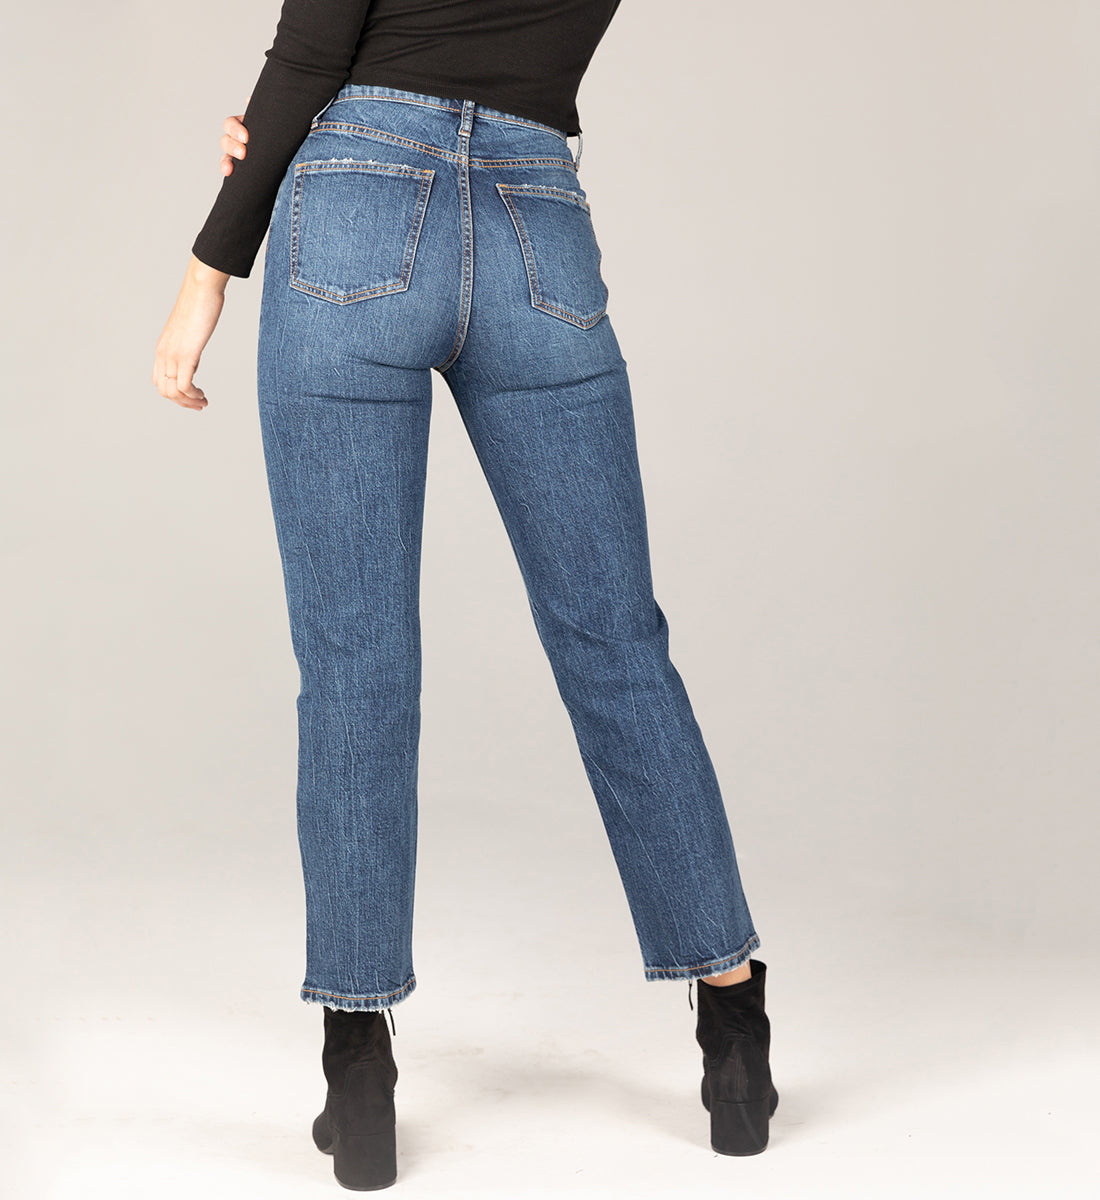 Highly Desirable Jeans